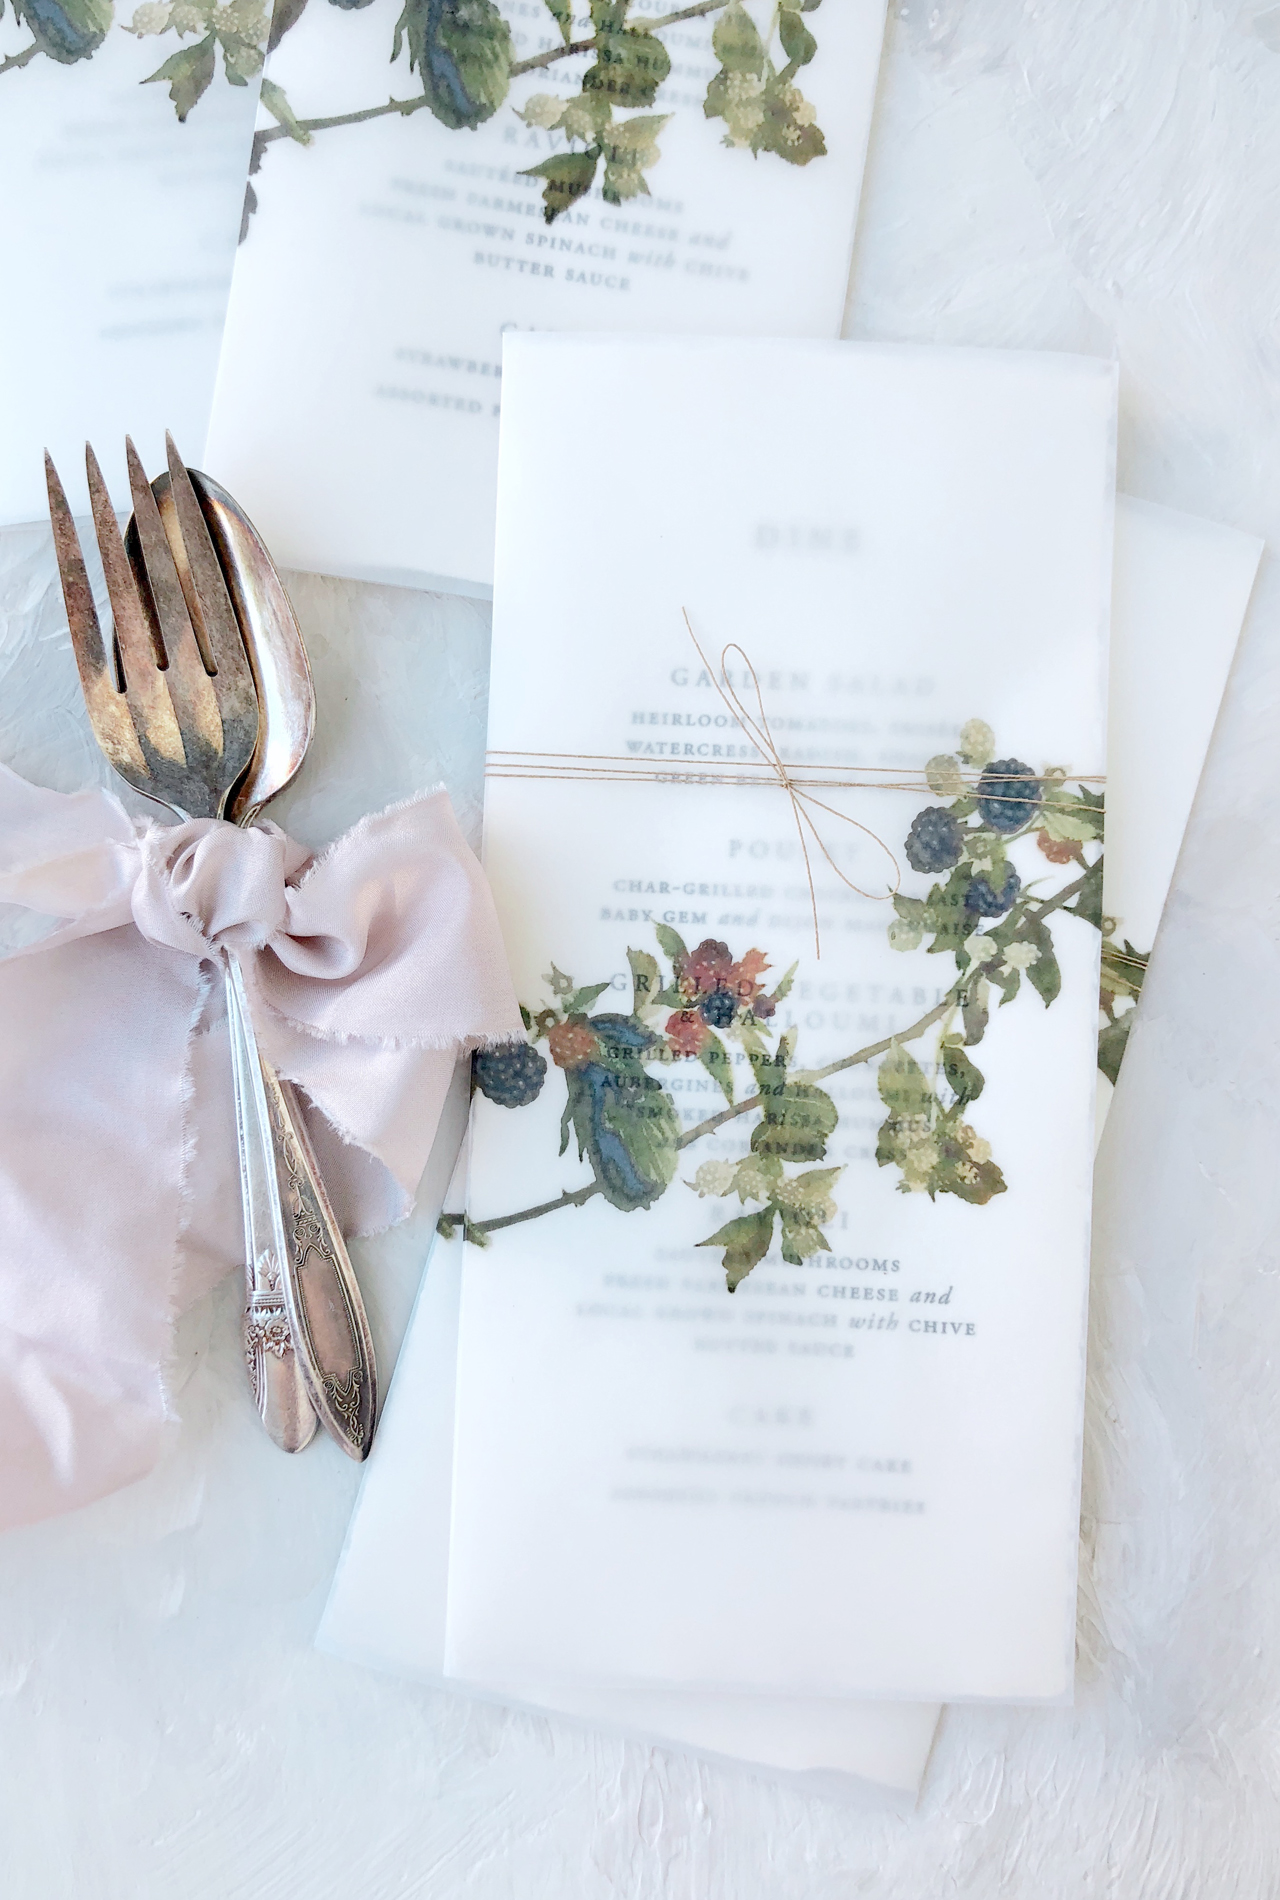 Wedding Menu with Vellum Overlay by Every Little Letter